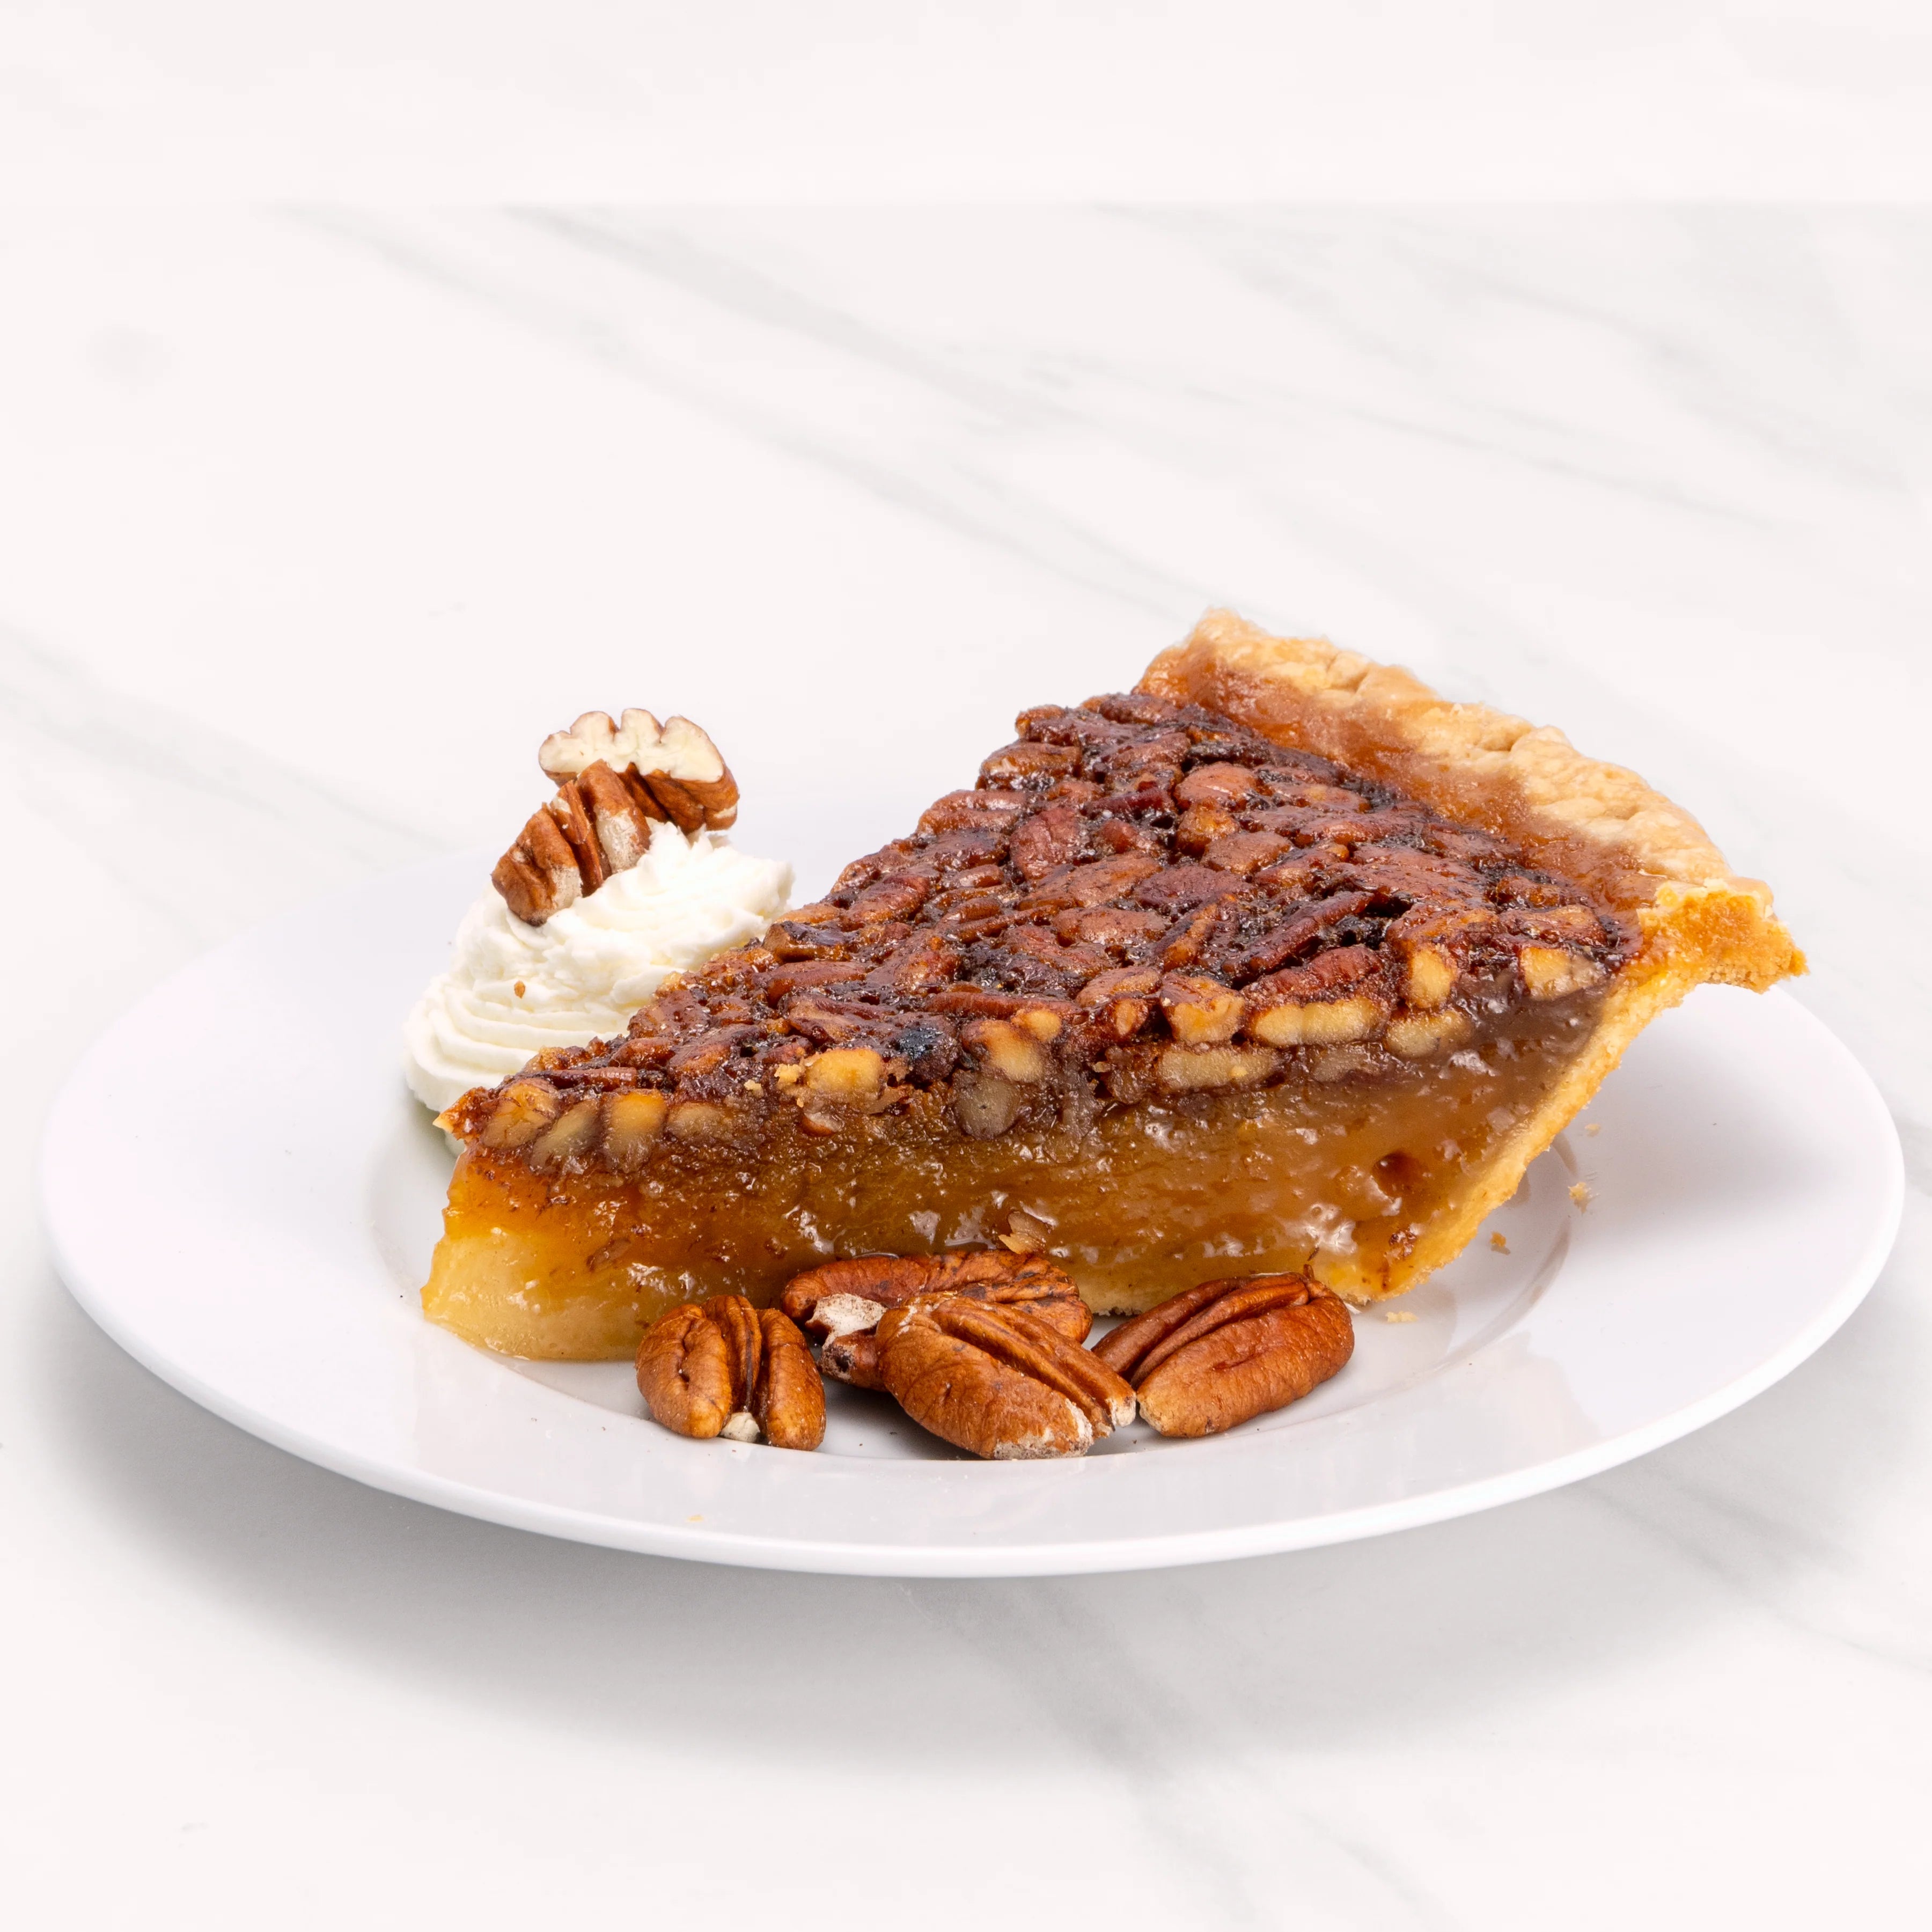 Slice of Pecan Pie garnished with pecans and crème.